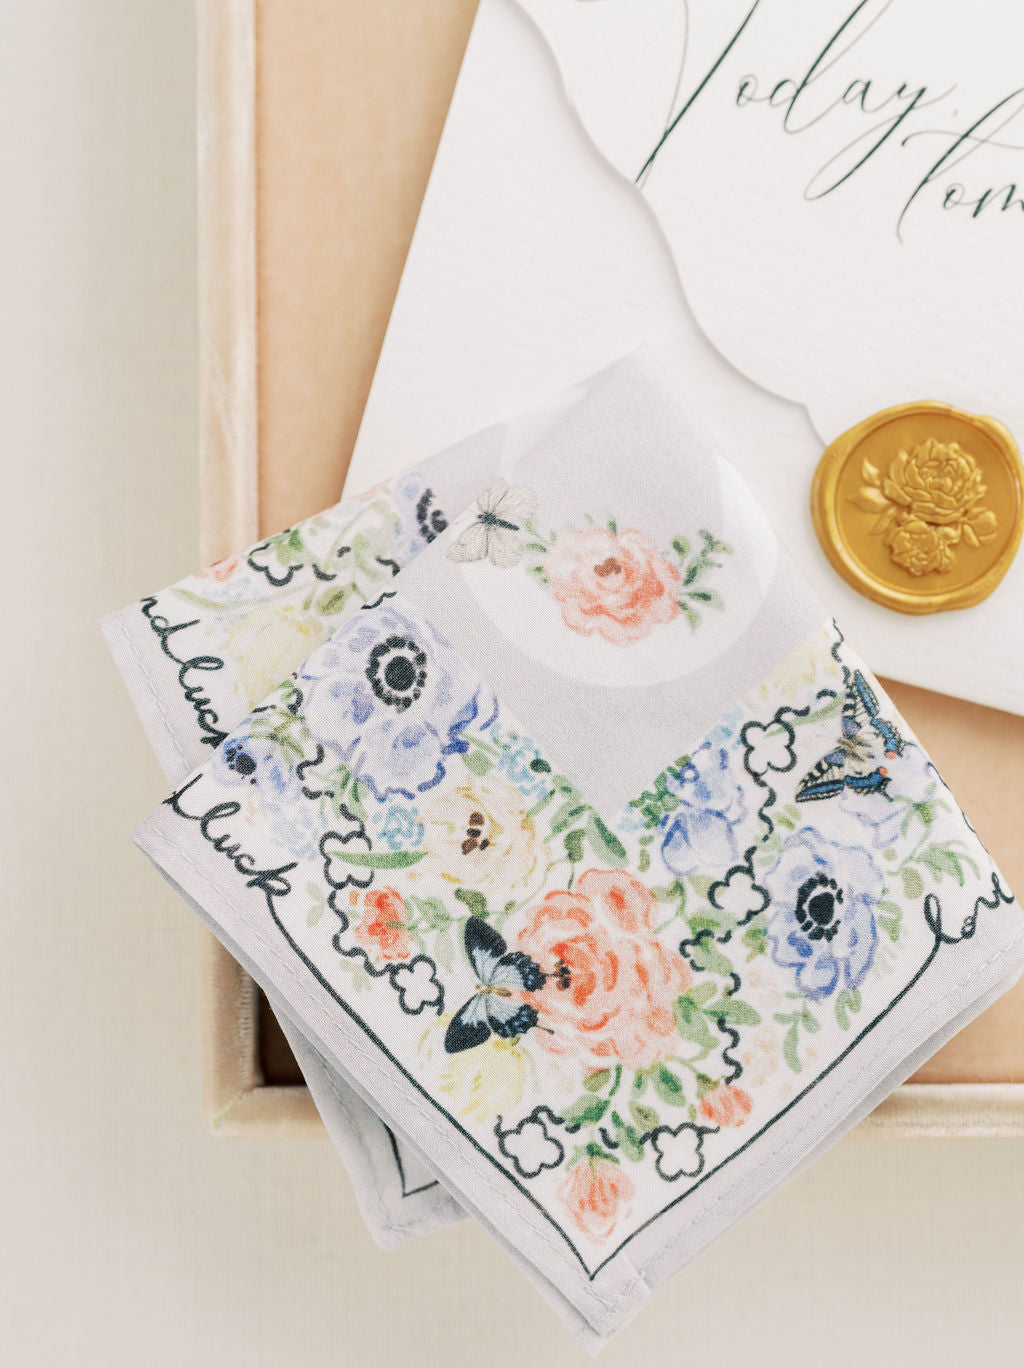 A close up of The Bella Rosa Collection's Wedding Floral Handkerchief and a coin in a box.